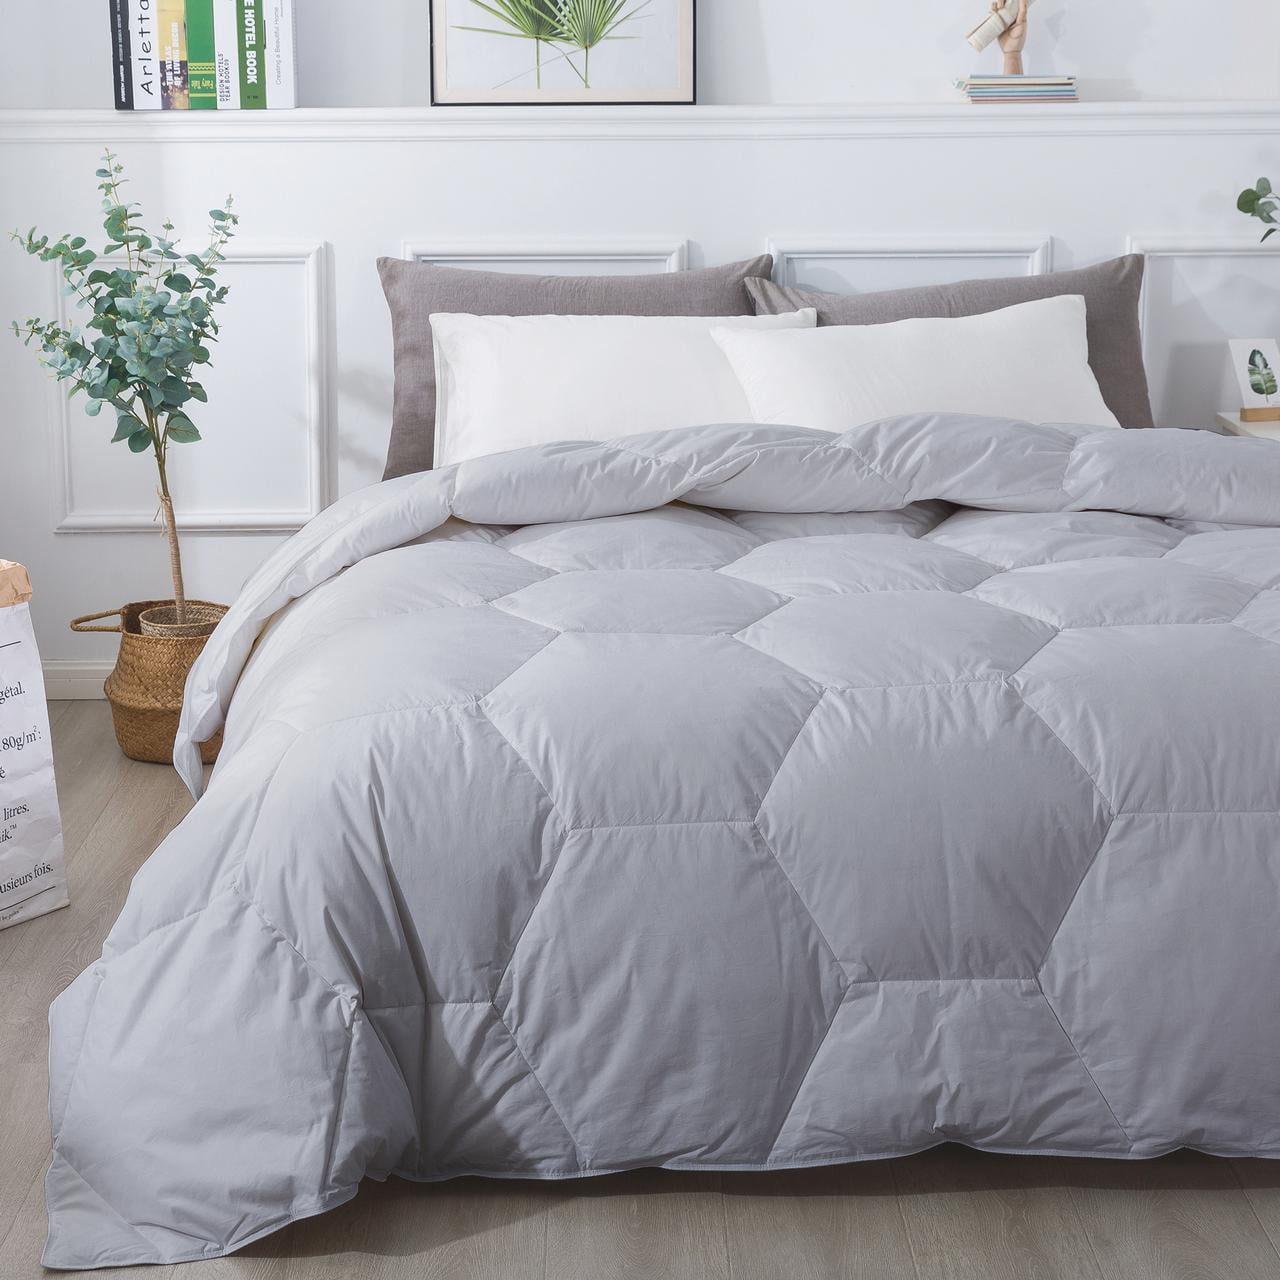 Details about   3 Pieces Embossed Down Alternative Comforter Bedding Set With Sham Pillow Cases